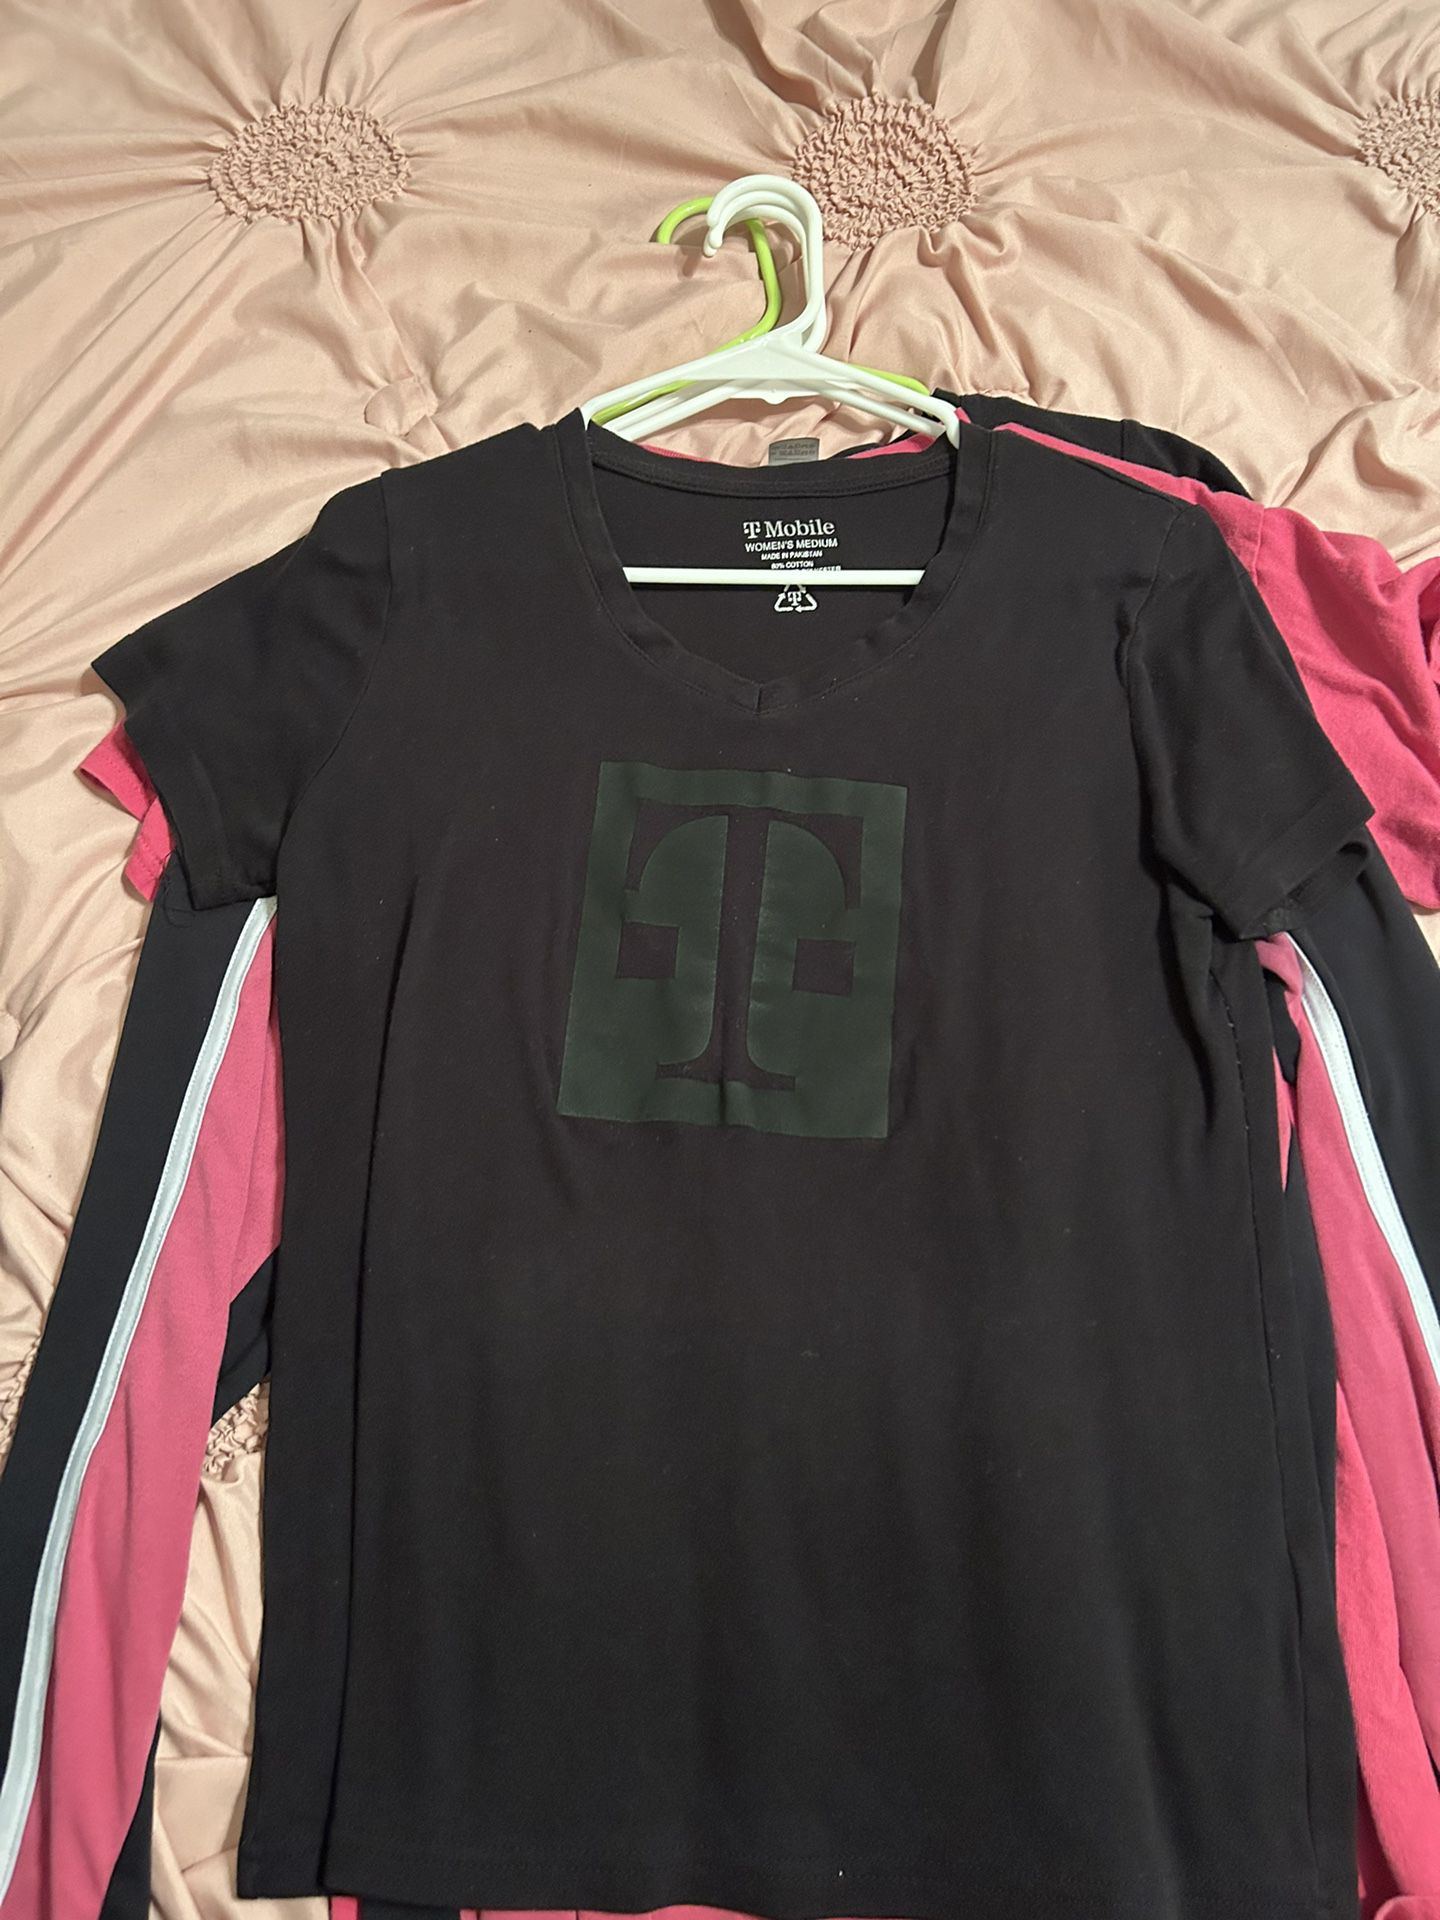 T-mobile Uniforms for Sale in Houston, TX - OfferUp